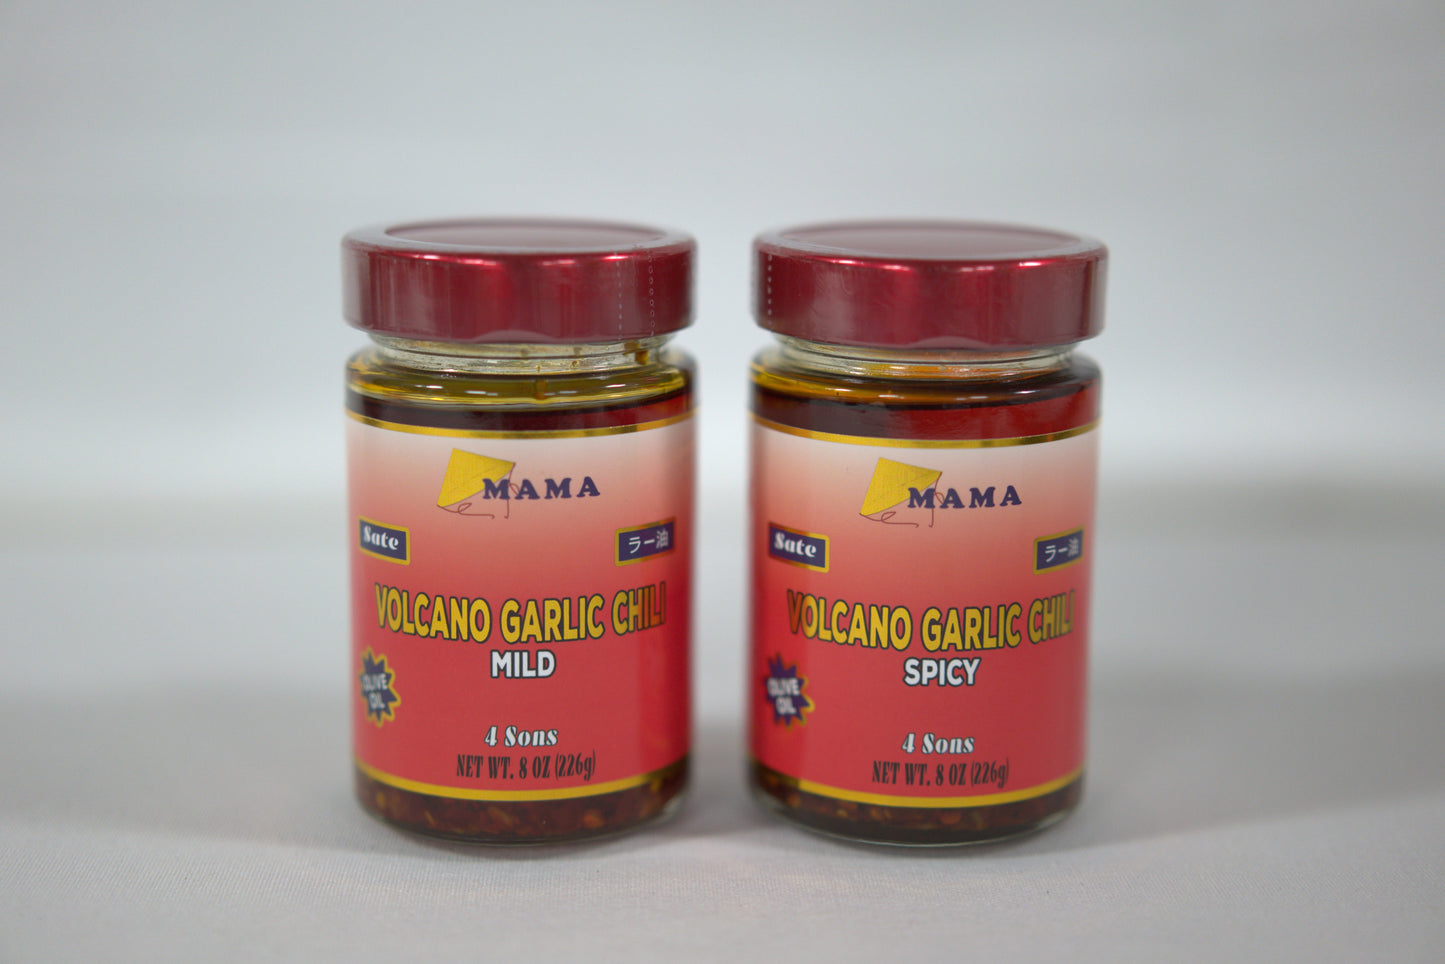 Volcano Garlic Chili Two Pack (Spicy And Mild w/ Red Box)